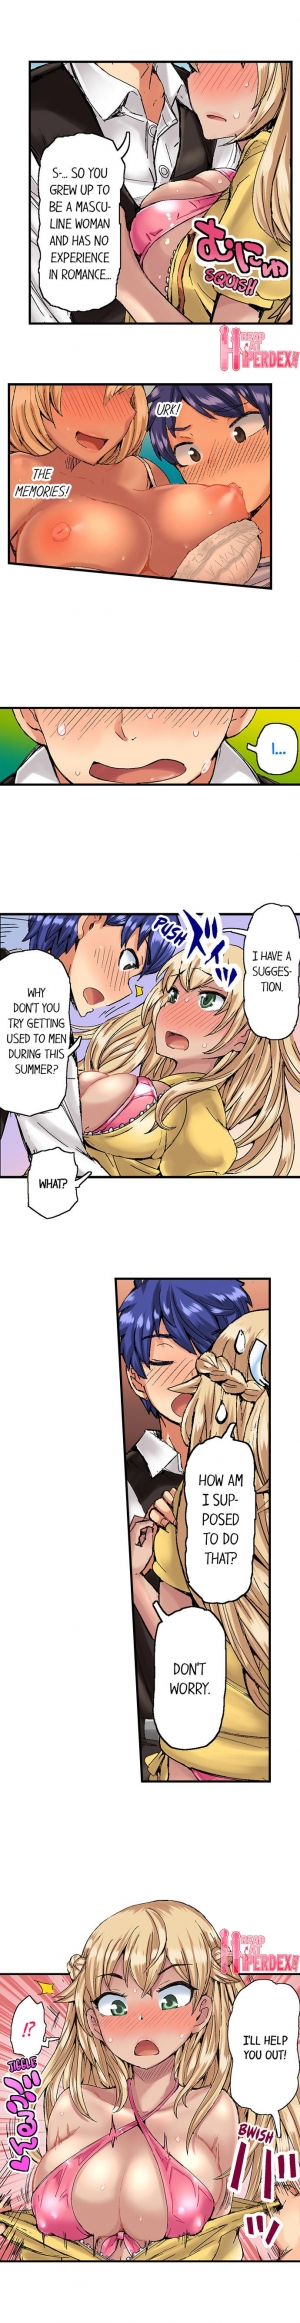 [Hiroyoshi Kira] Taking a Hot Tanned Chick’s Virginity (Ch.1-5) [English] - Page 31